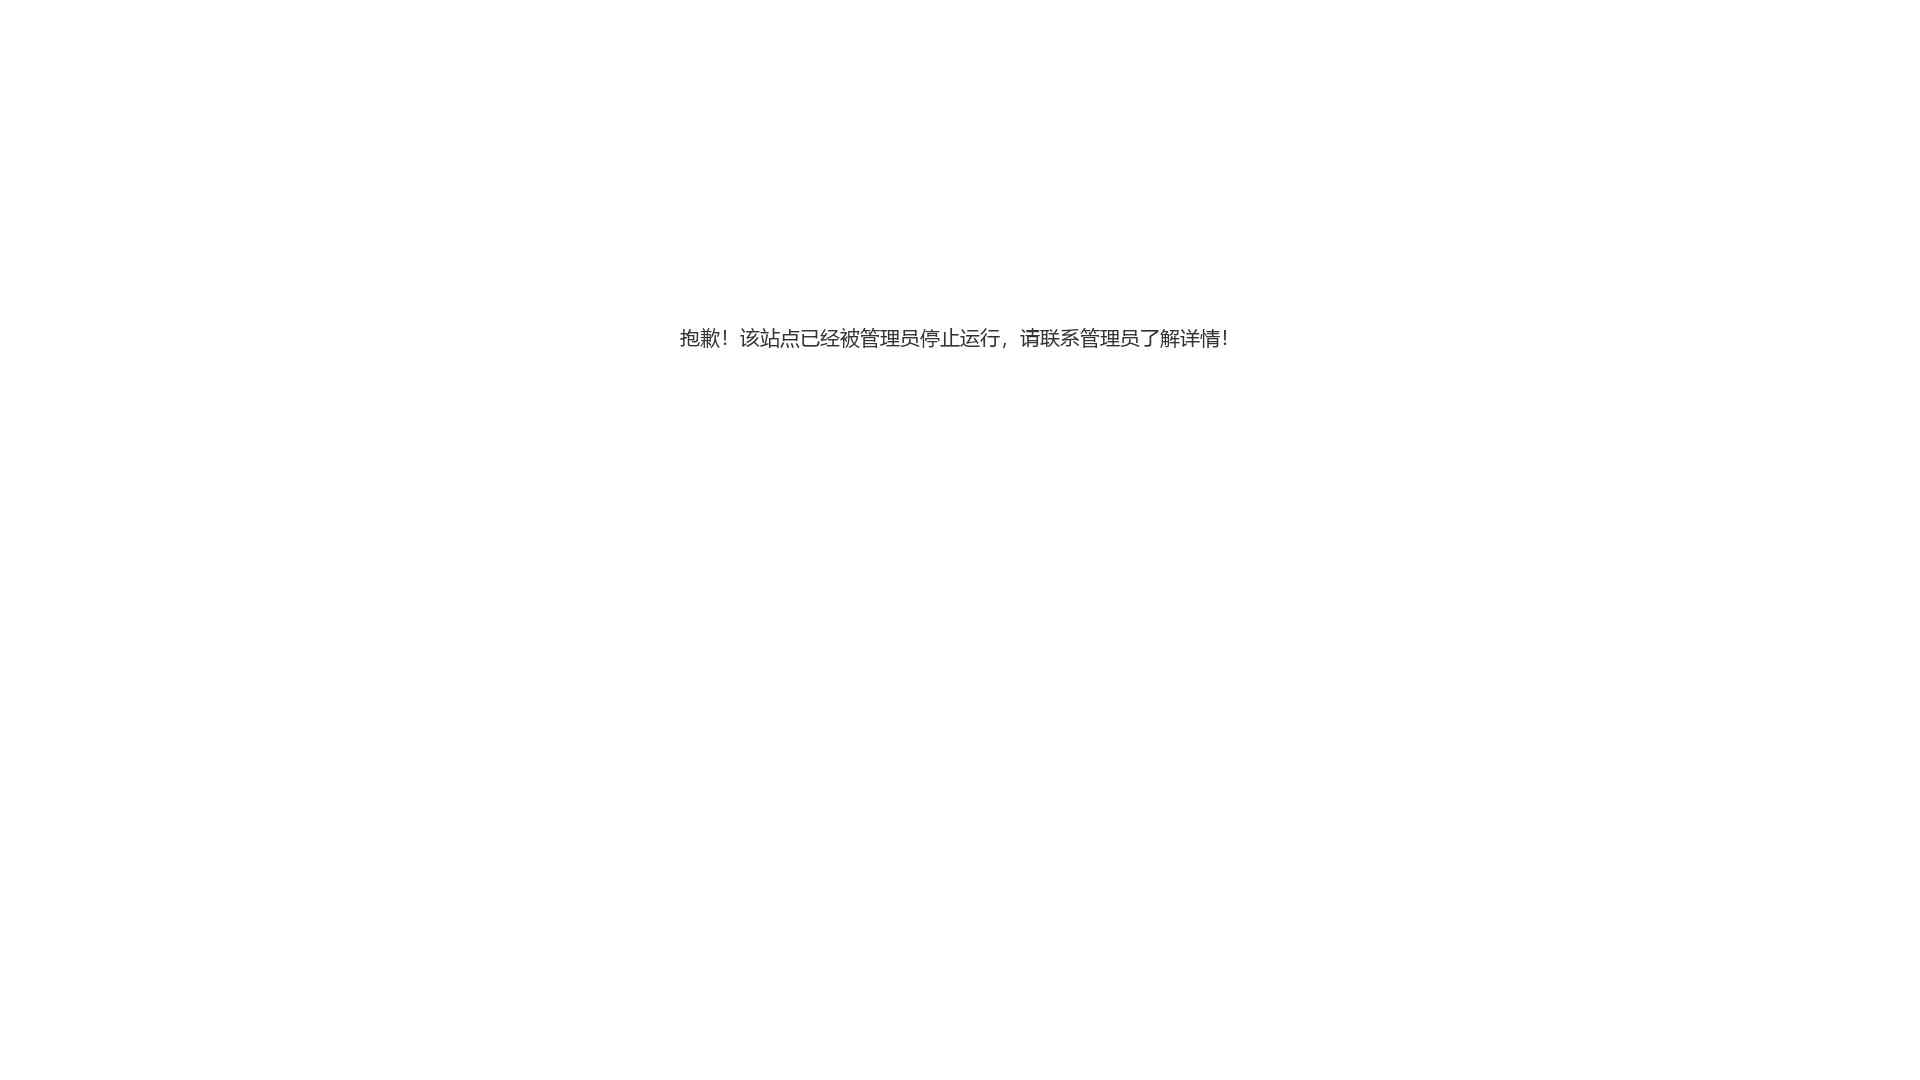 Test Page for Apache Installation截图时间：2024-02-23